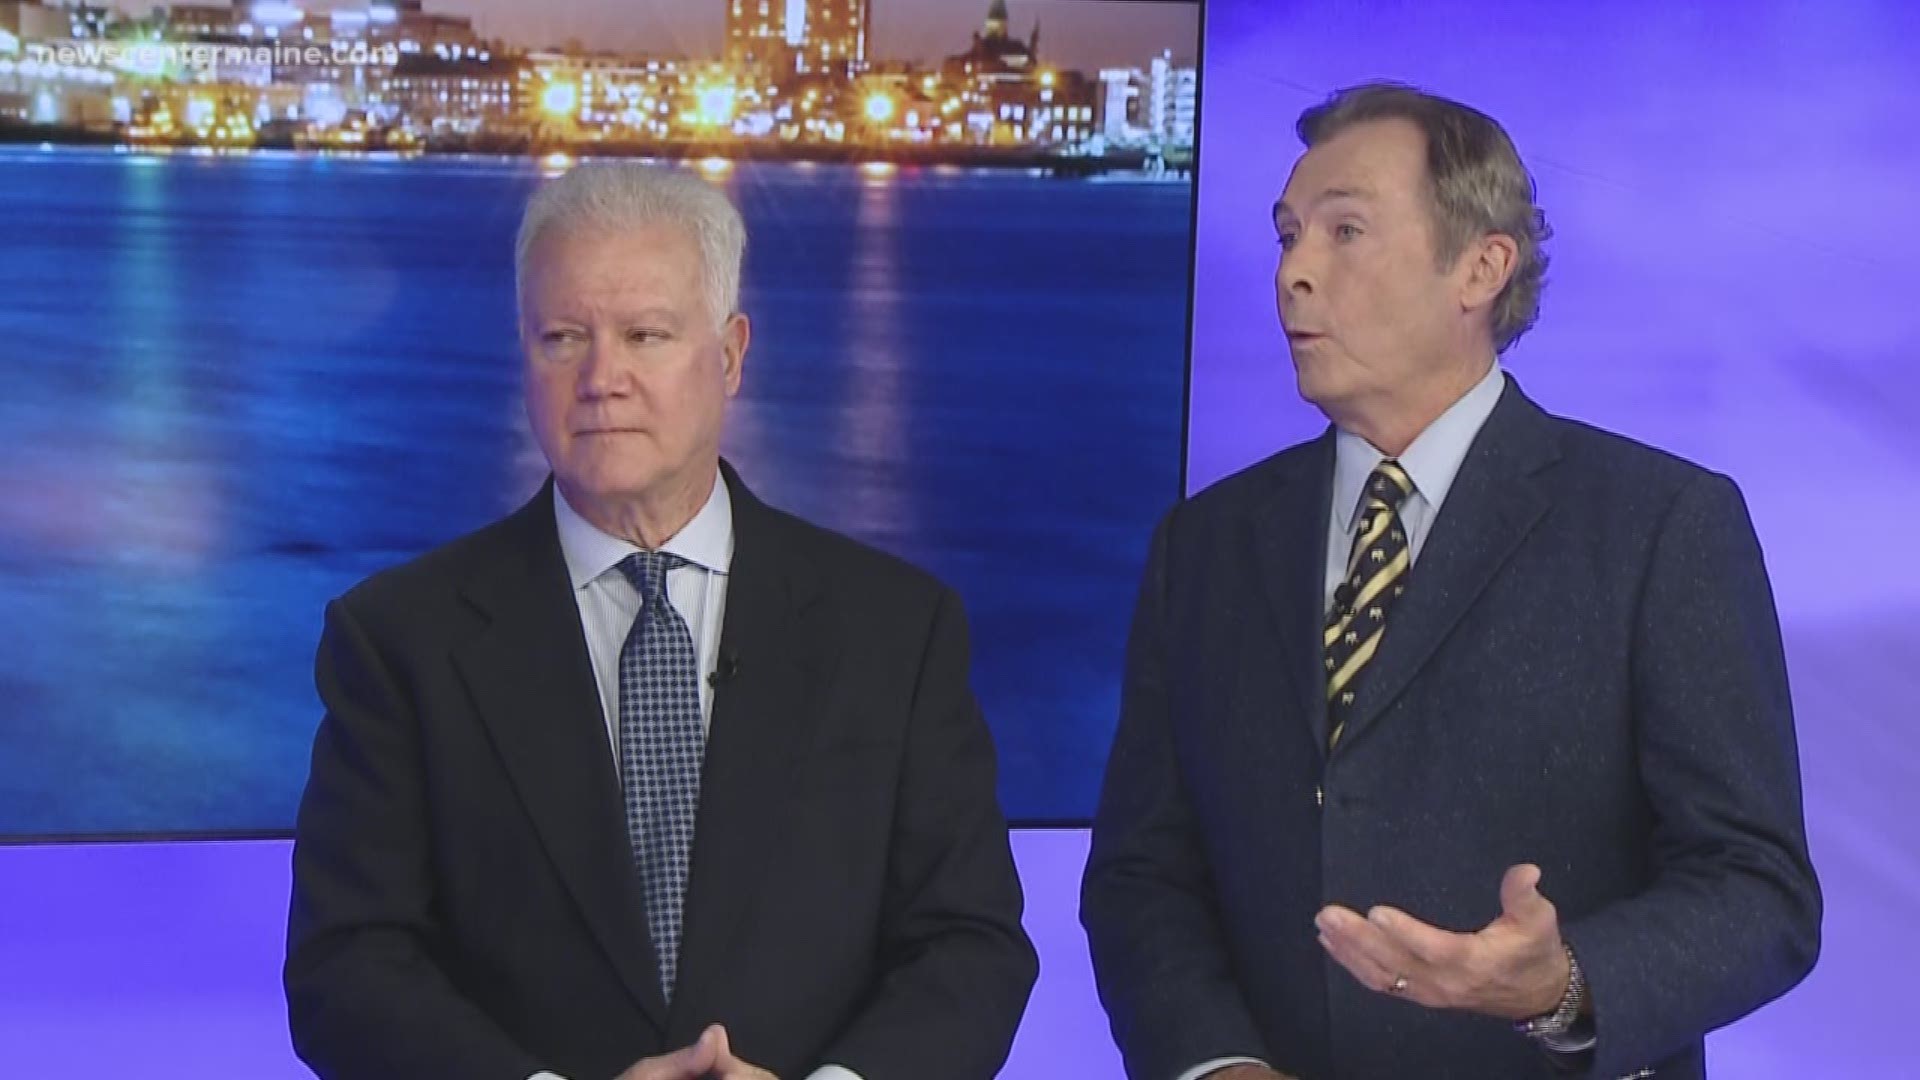 Political Brew's Phil and John talk about RCV decision